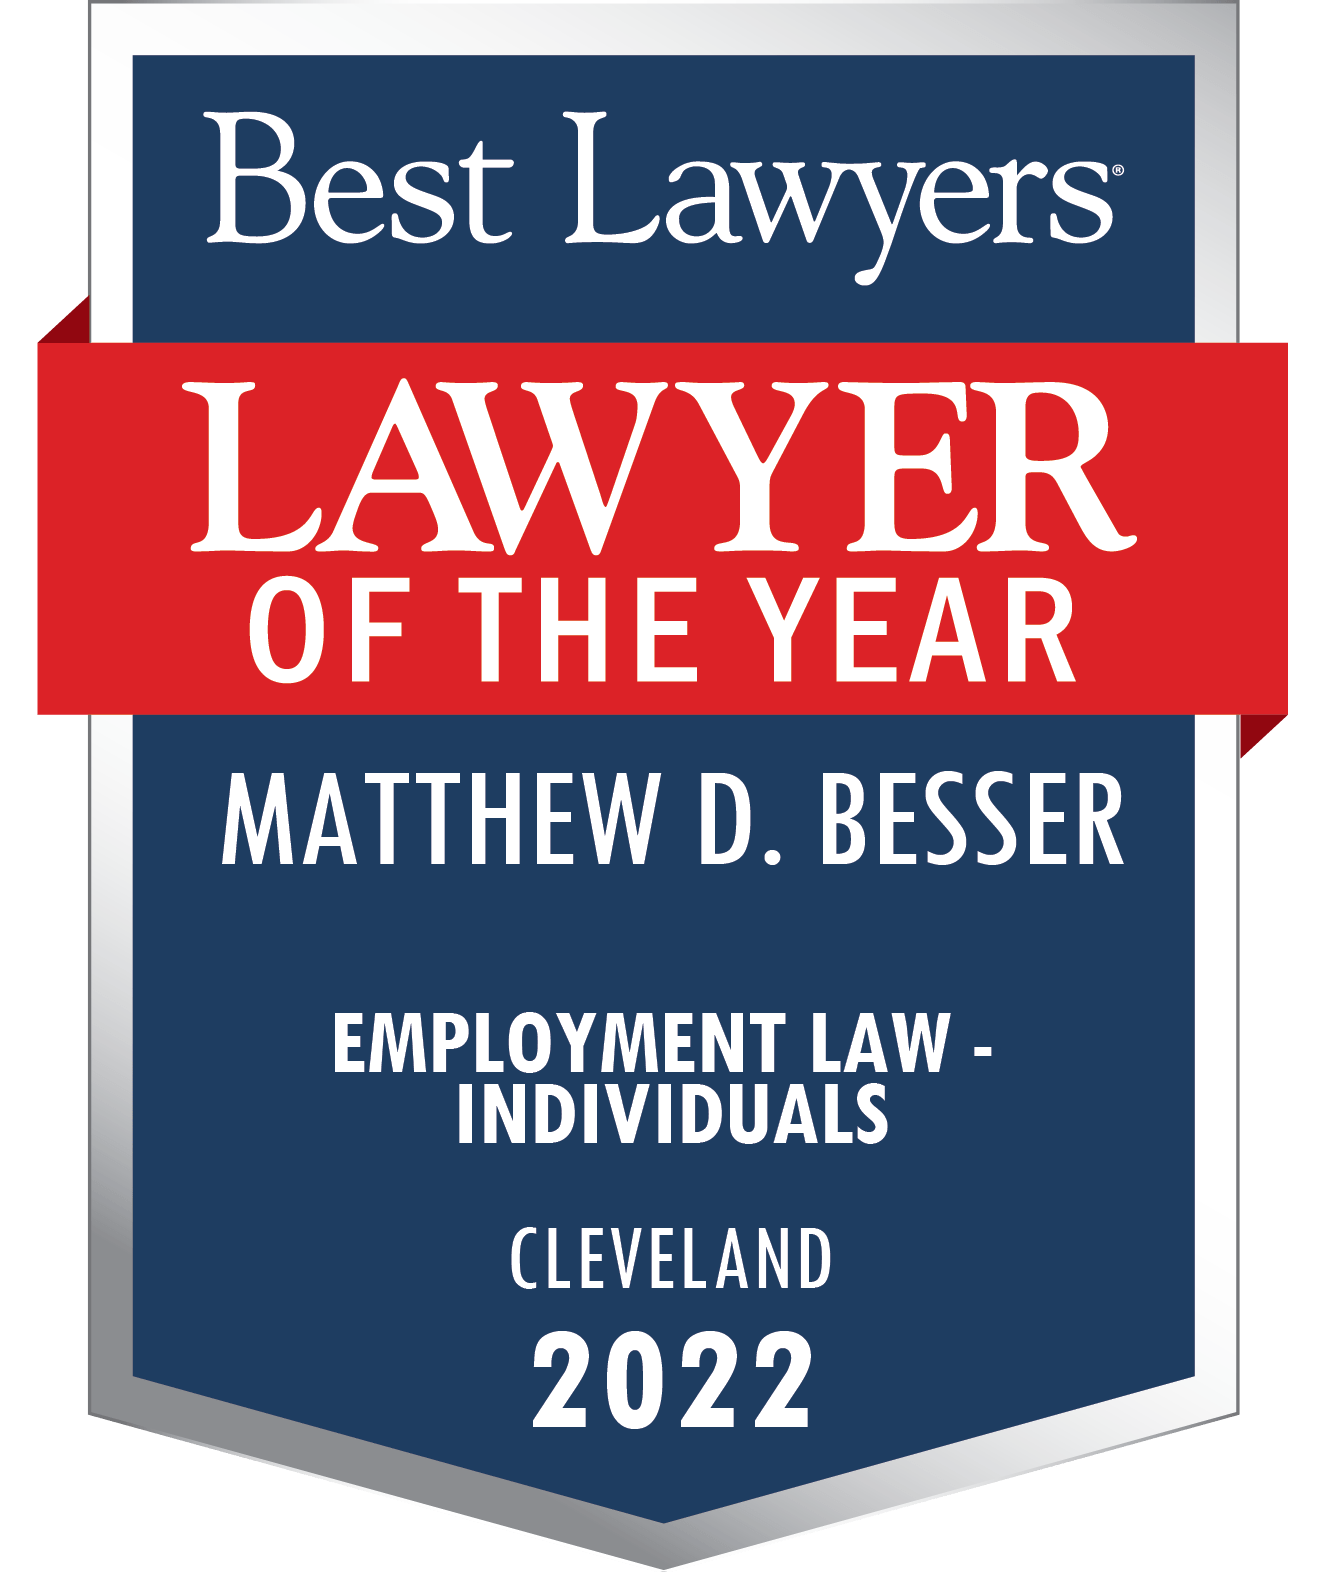 Best Lawyers Amy Glesius Lawyer of the Year Badge